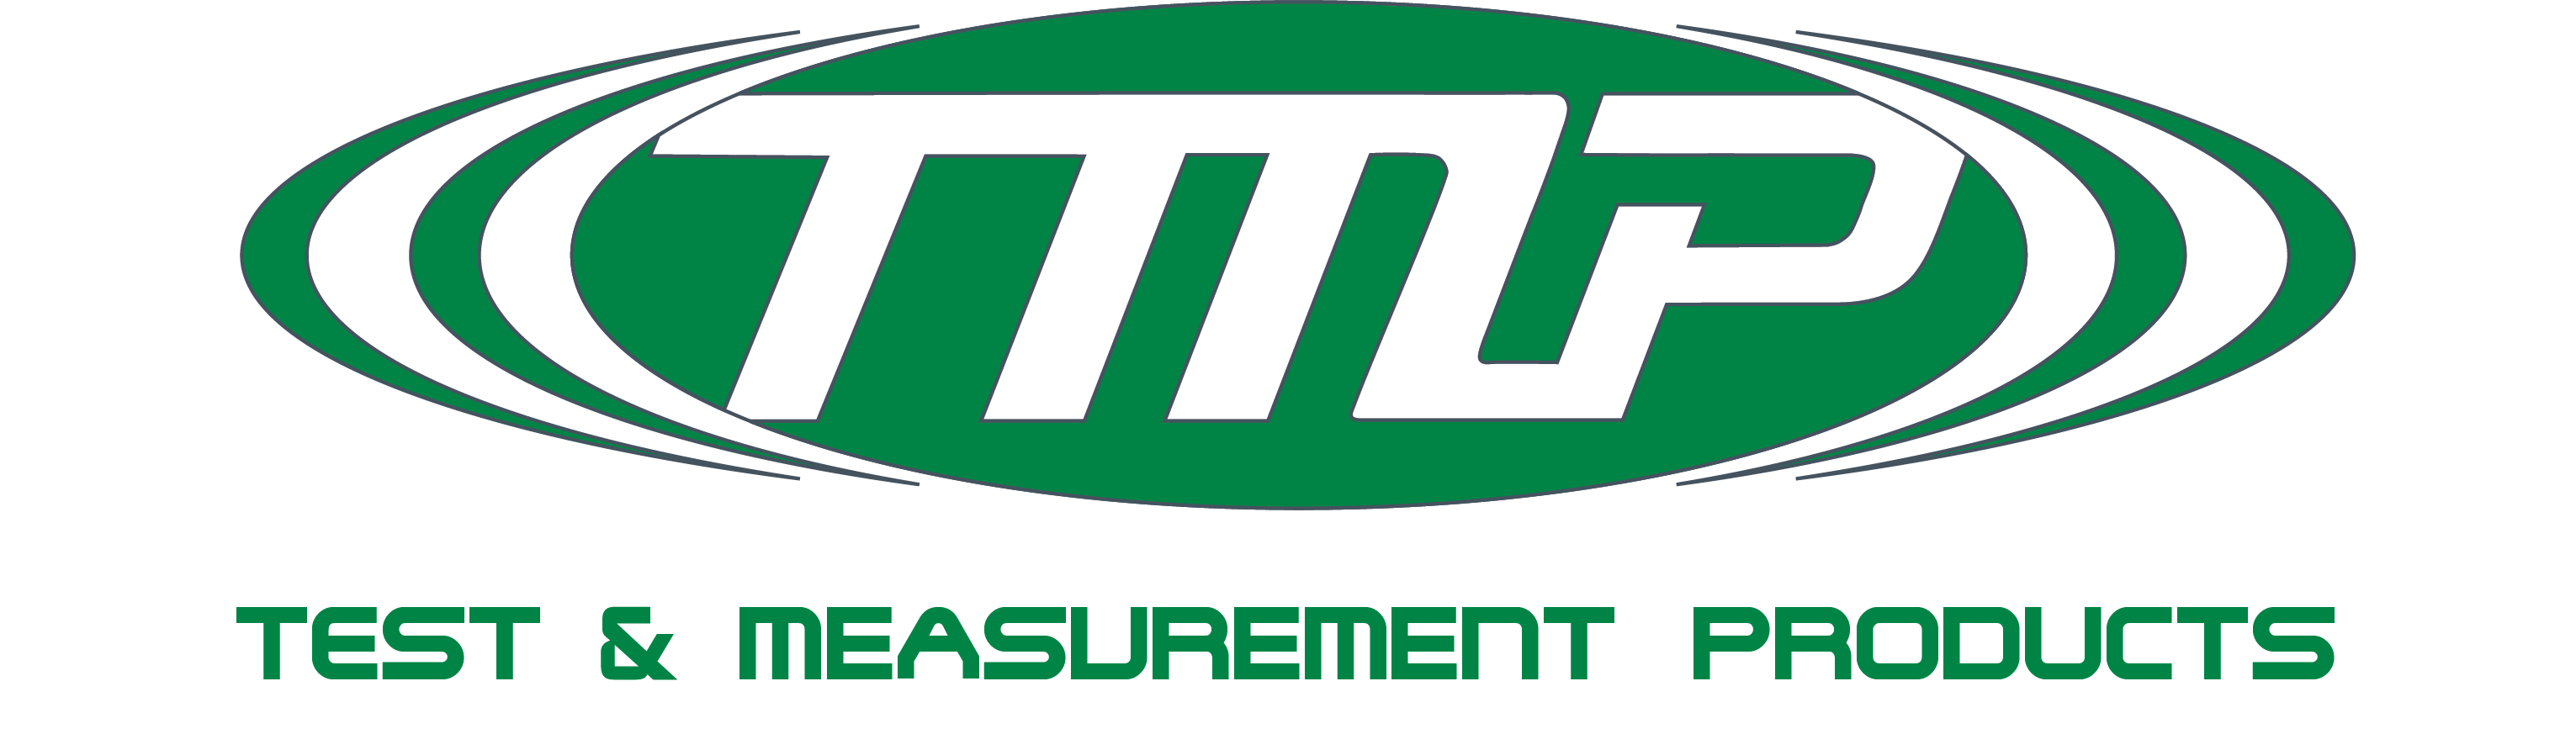 Green CTC TMP Line Logo with Test and Measurement Products tagline